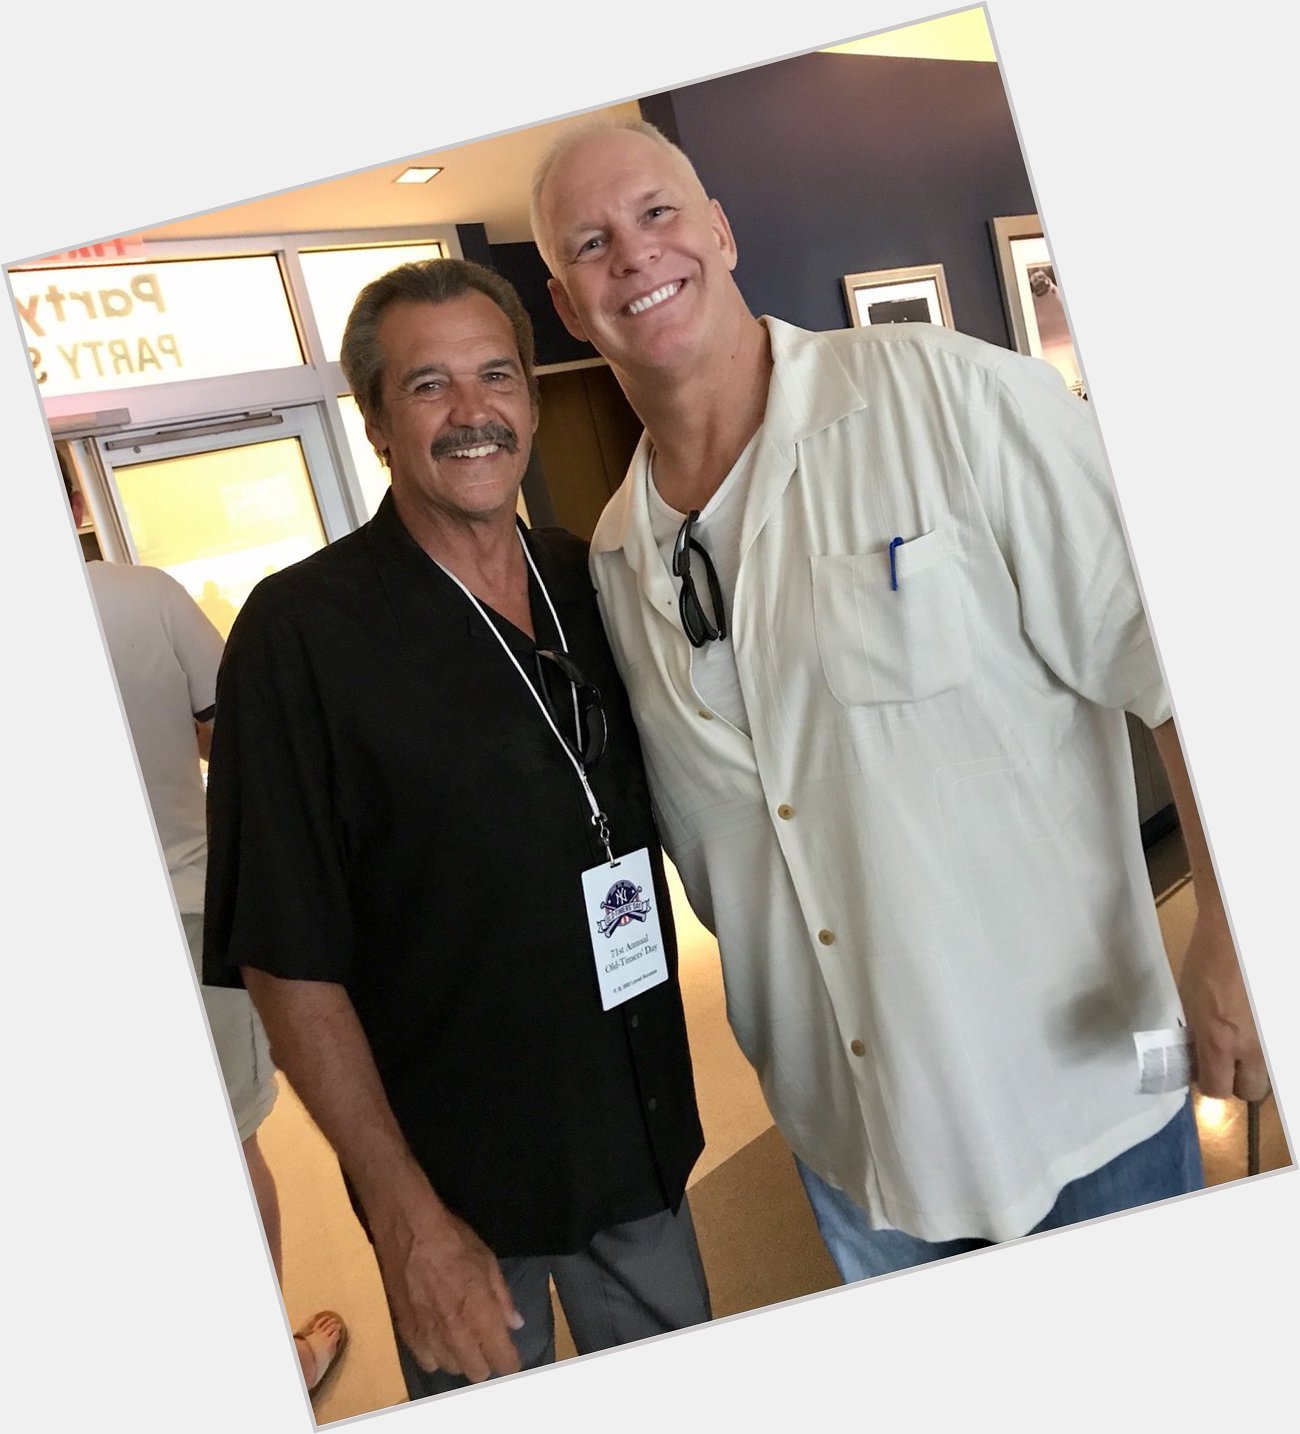 Yankee fans: please help me wish Ron Guidry (Gator) a very Happy Birthday   